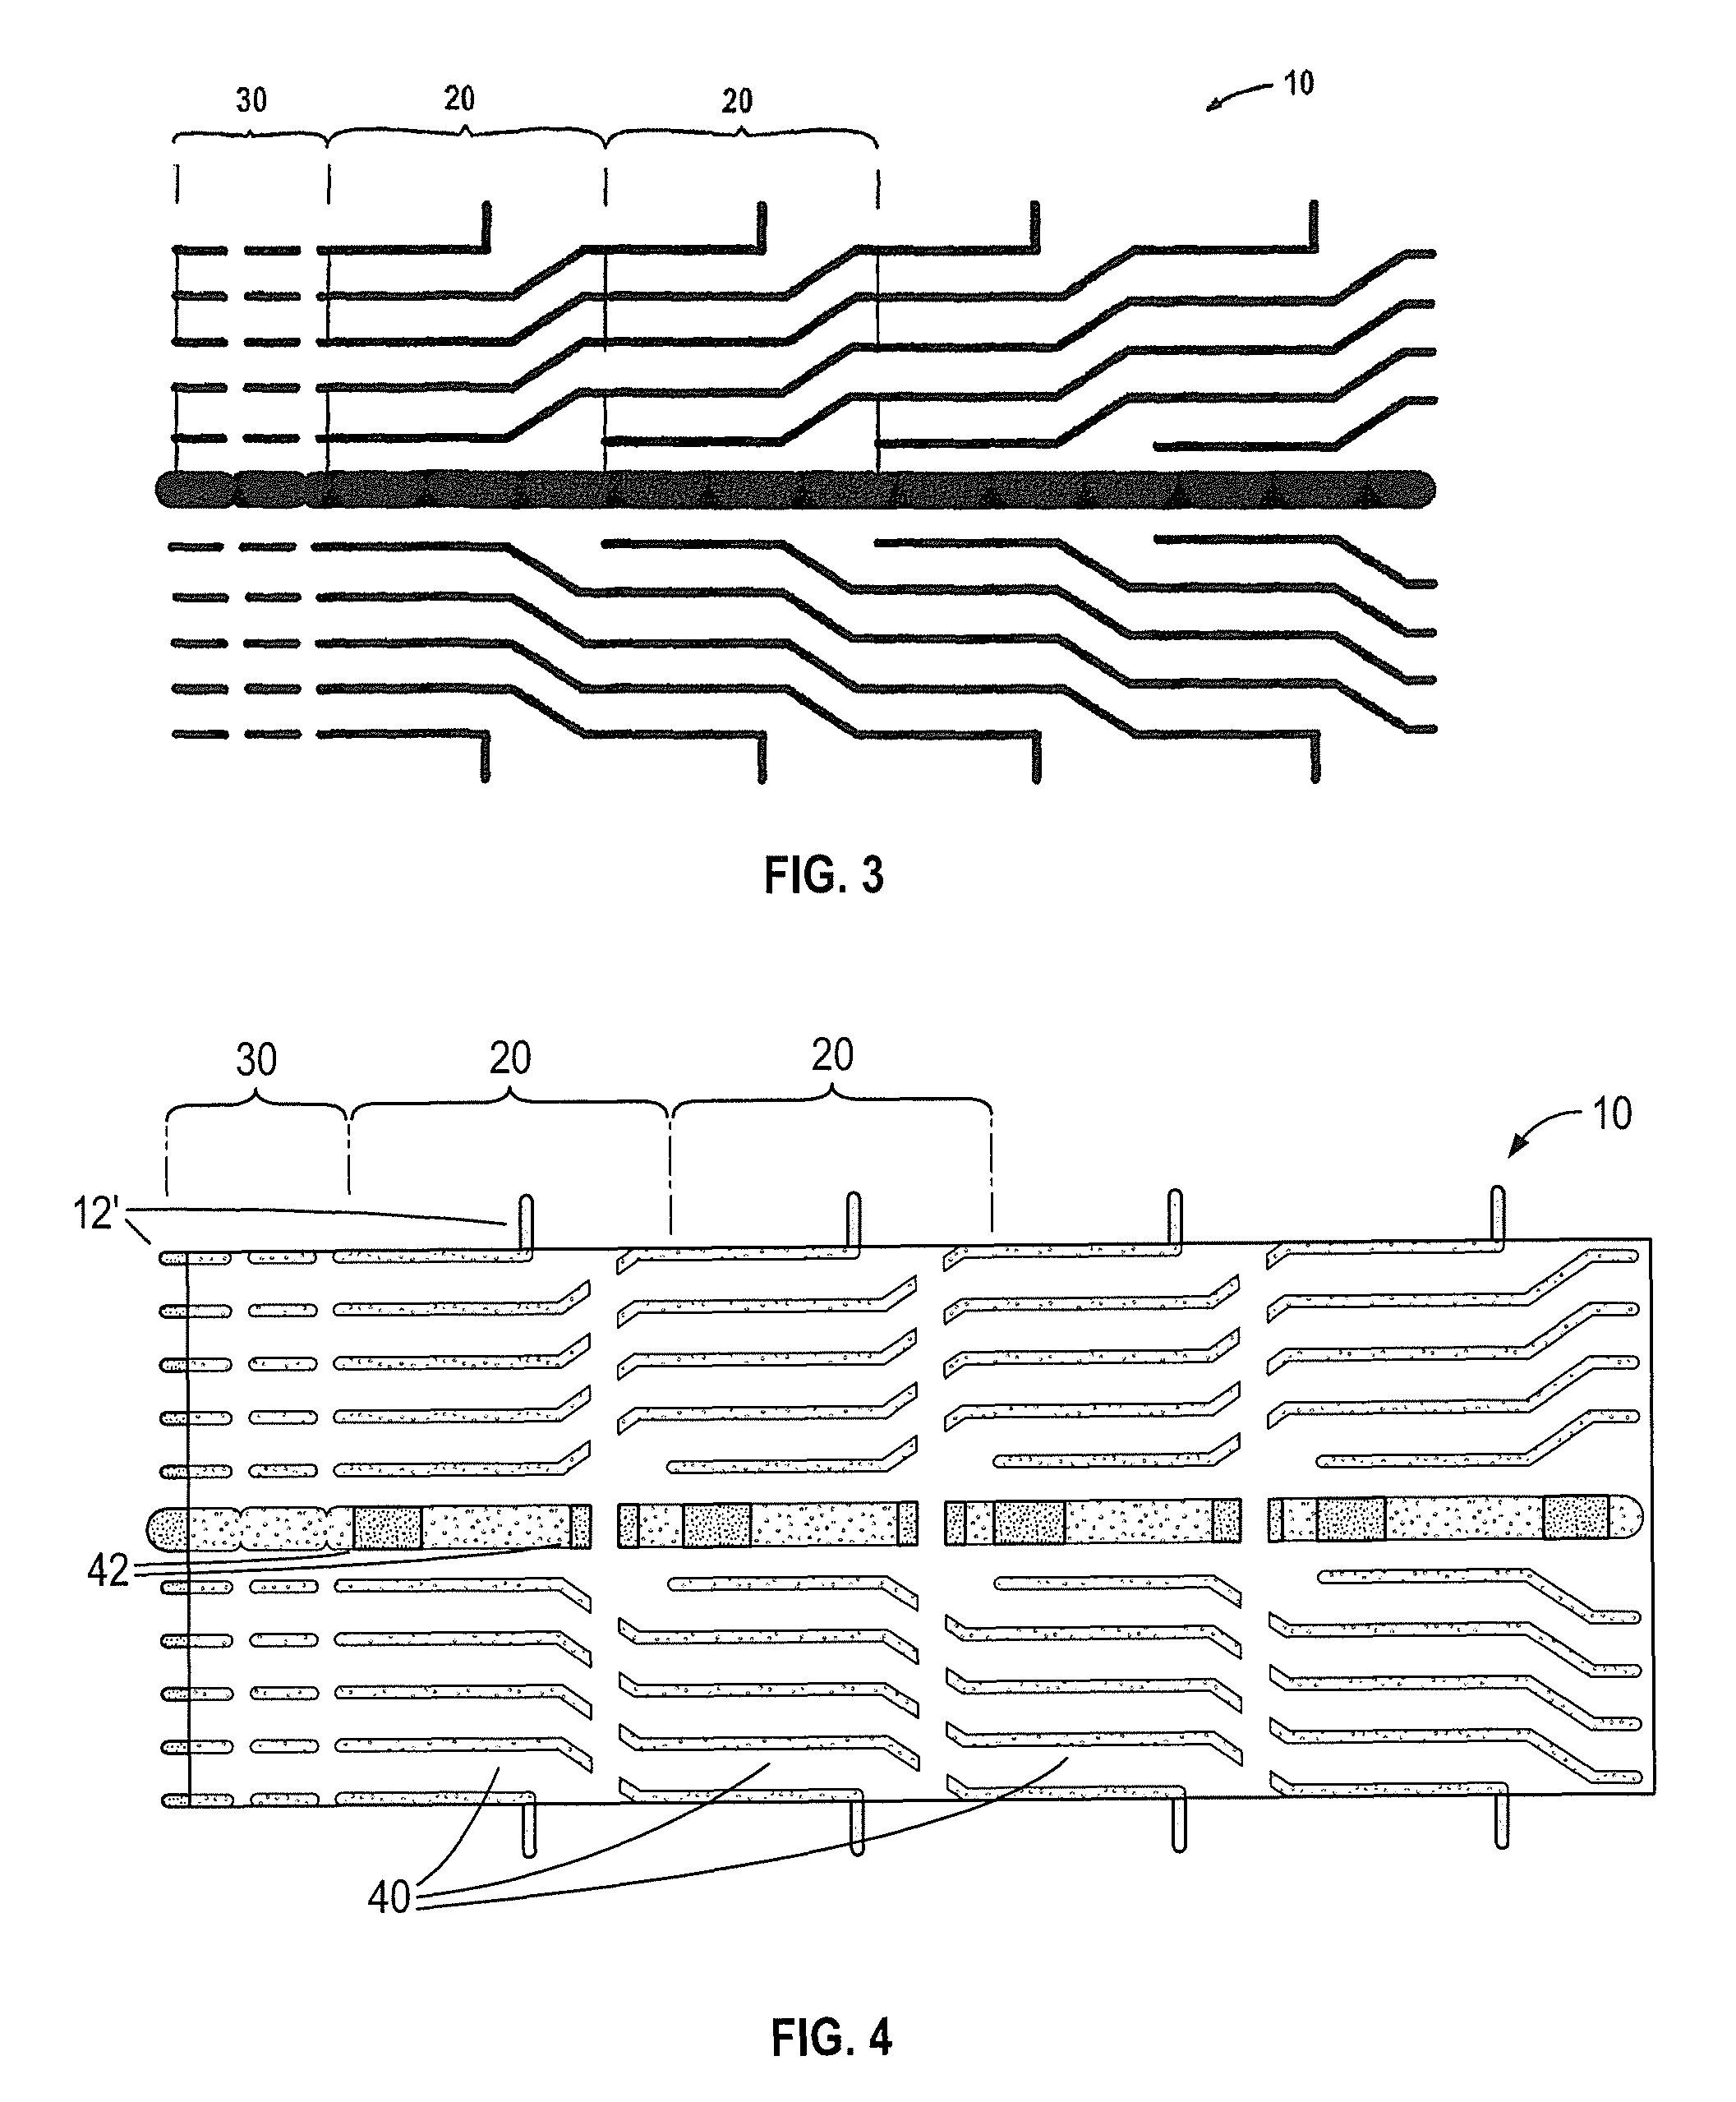 Method for manufacturing long force sensors using screen printing technology